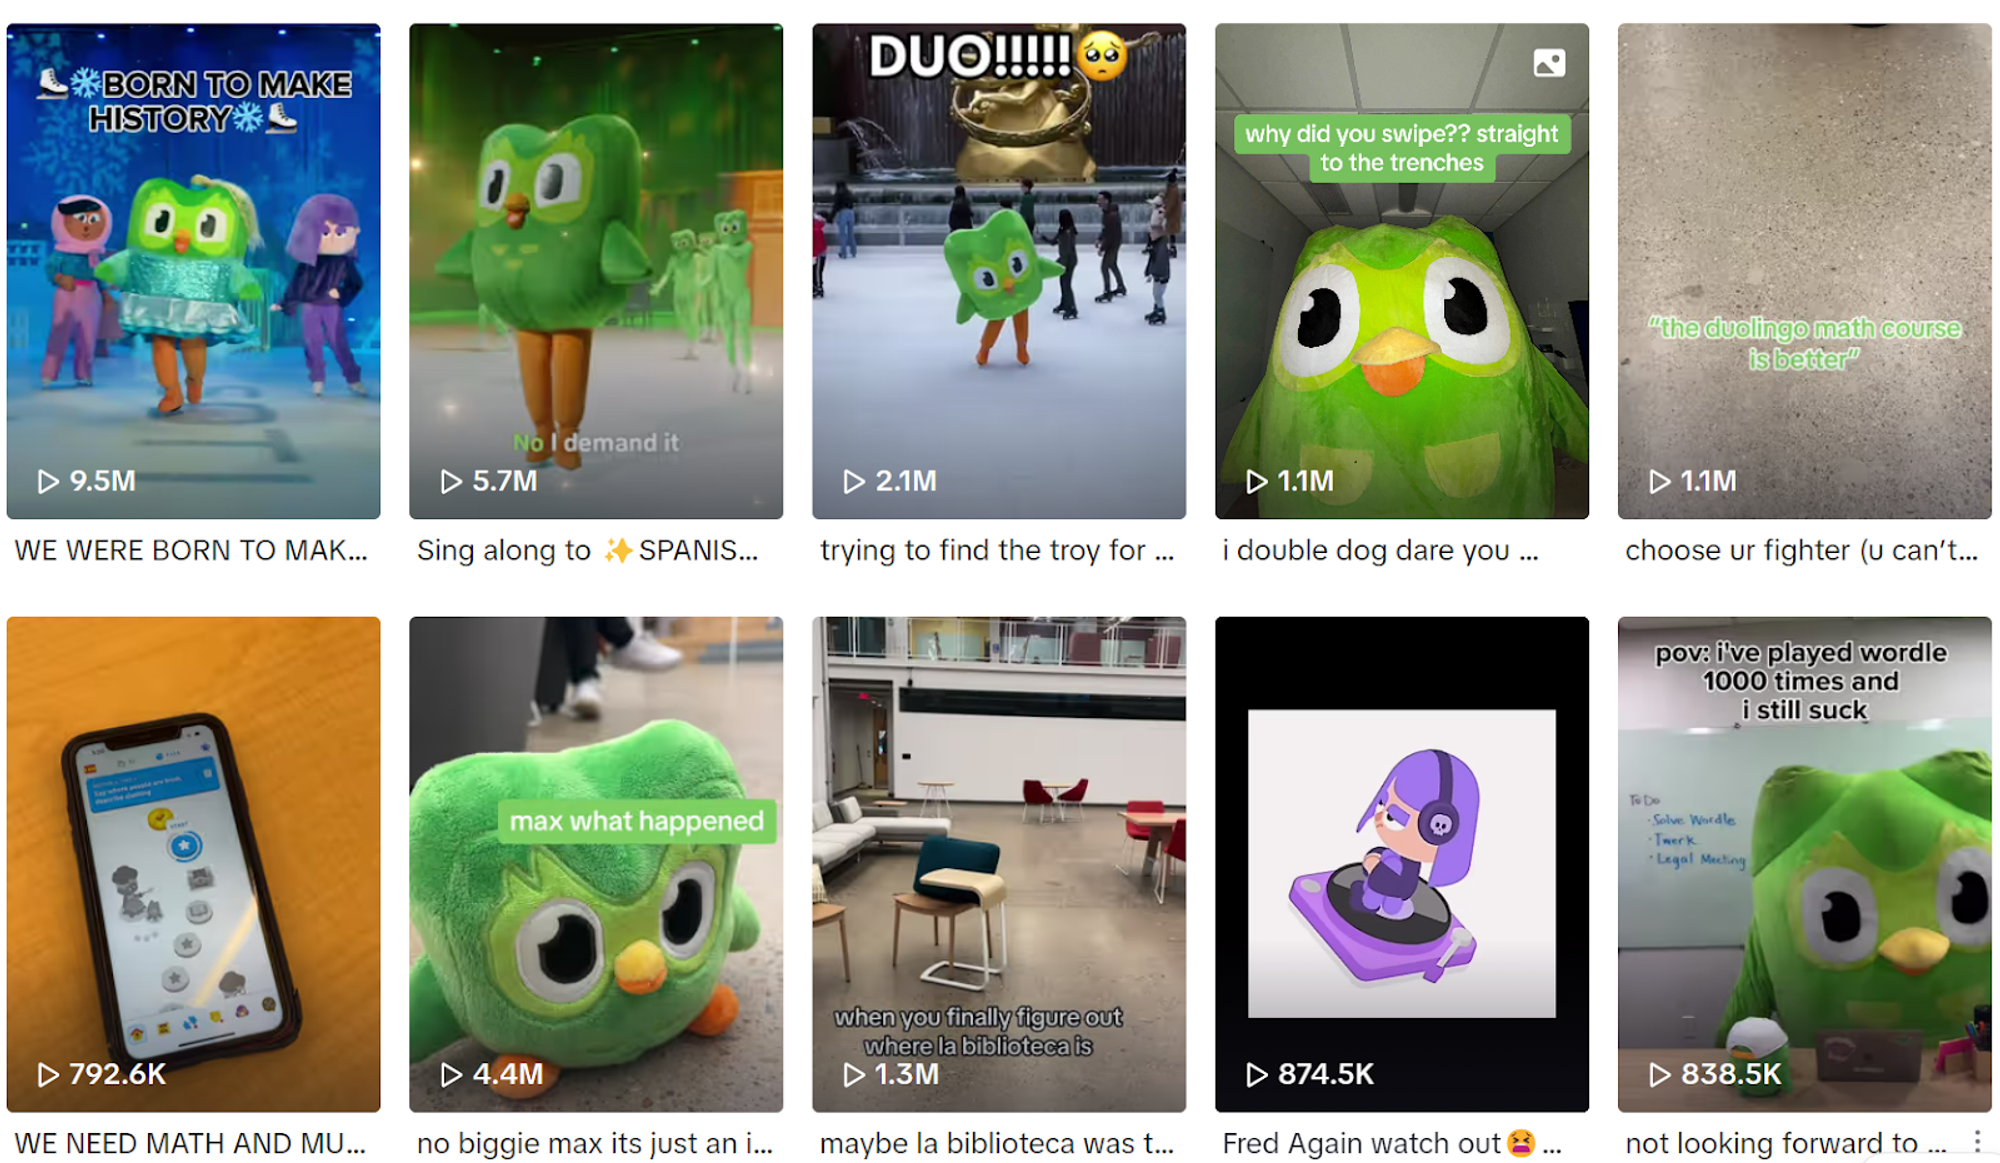 Duolingo’s TikTok page featuring its mascot, ‘Duo the owl’